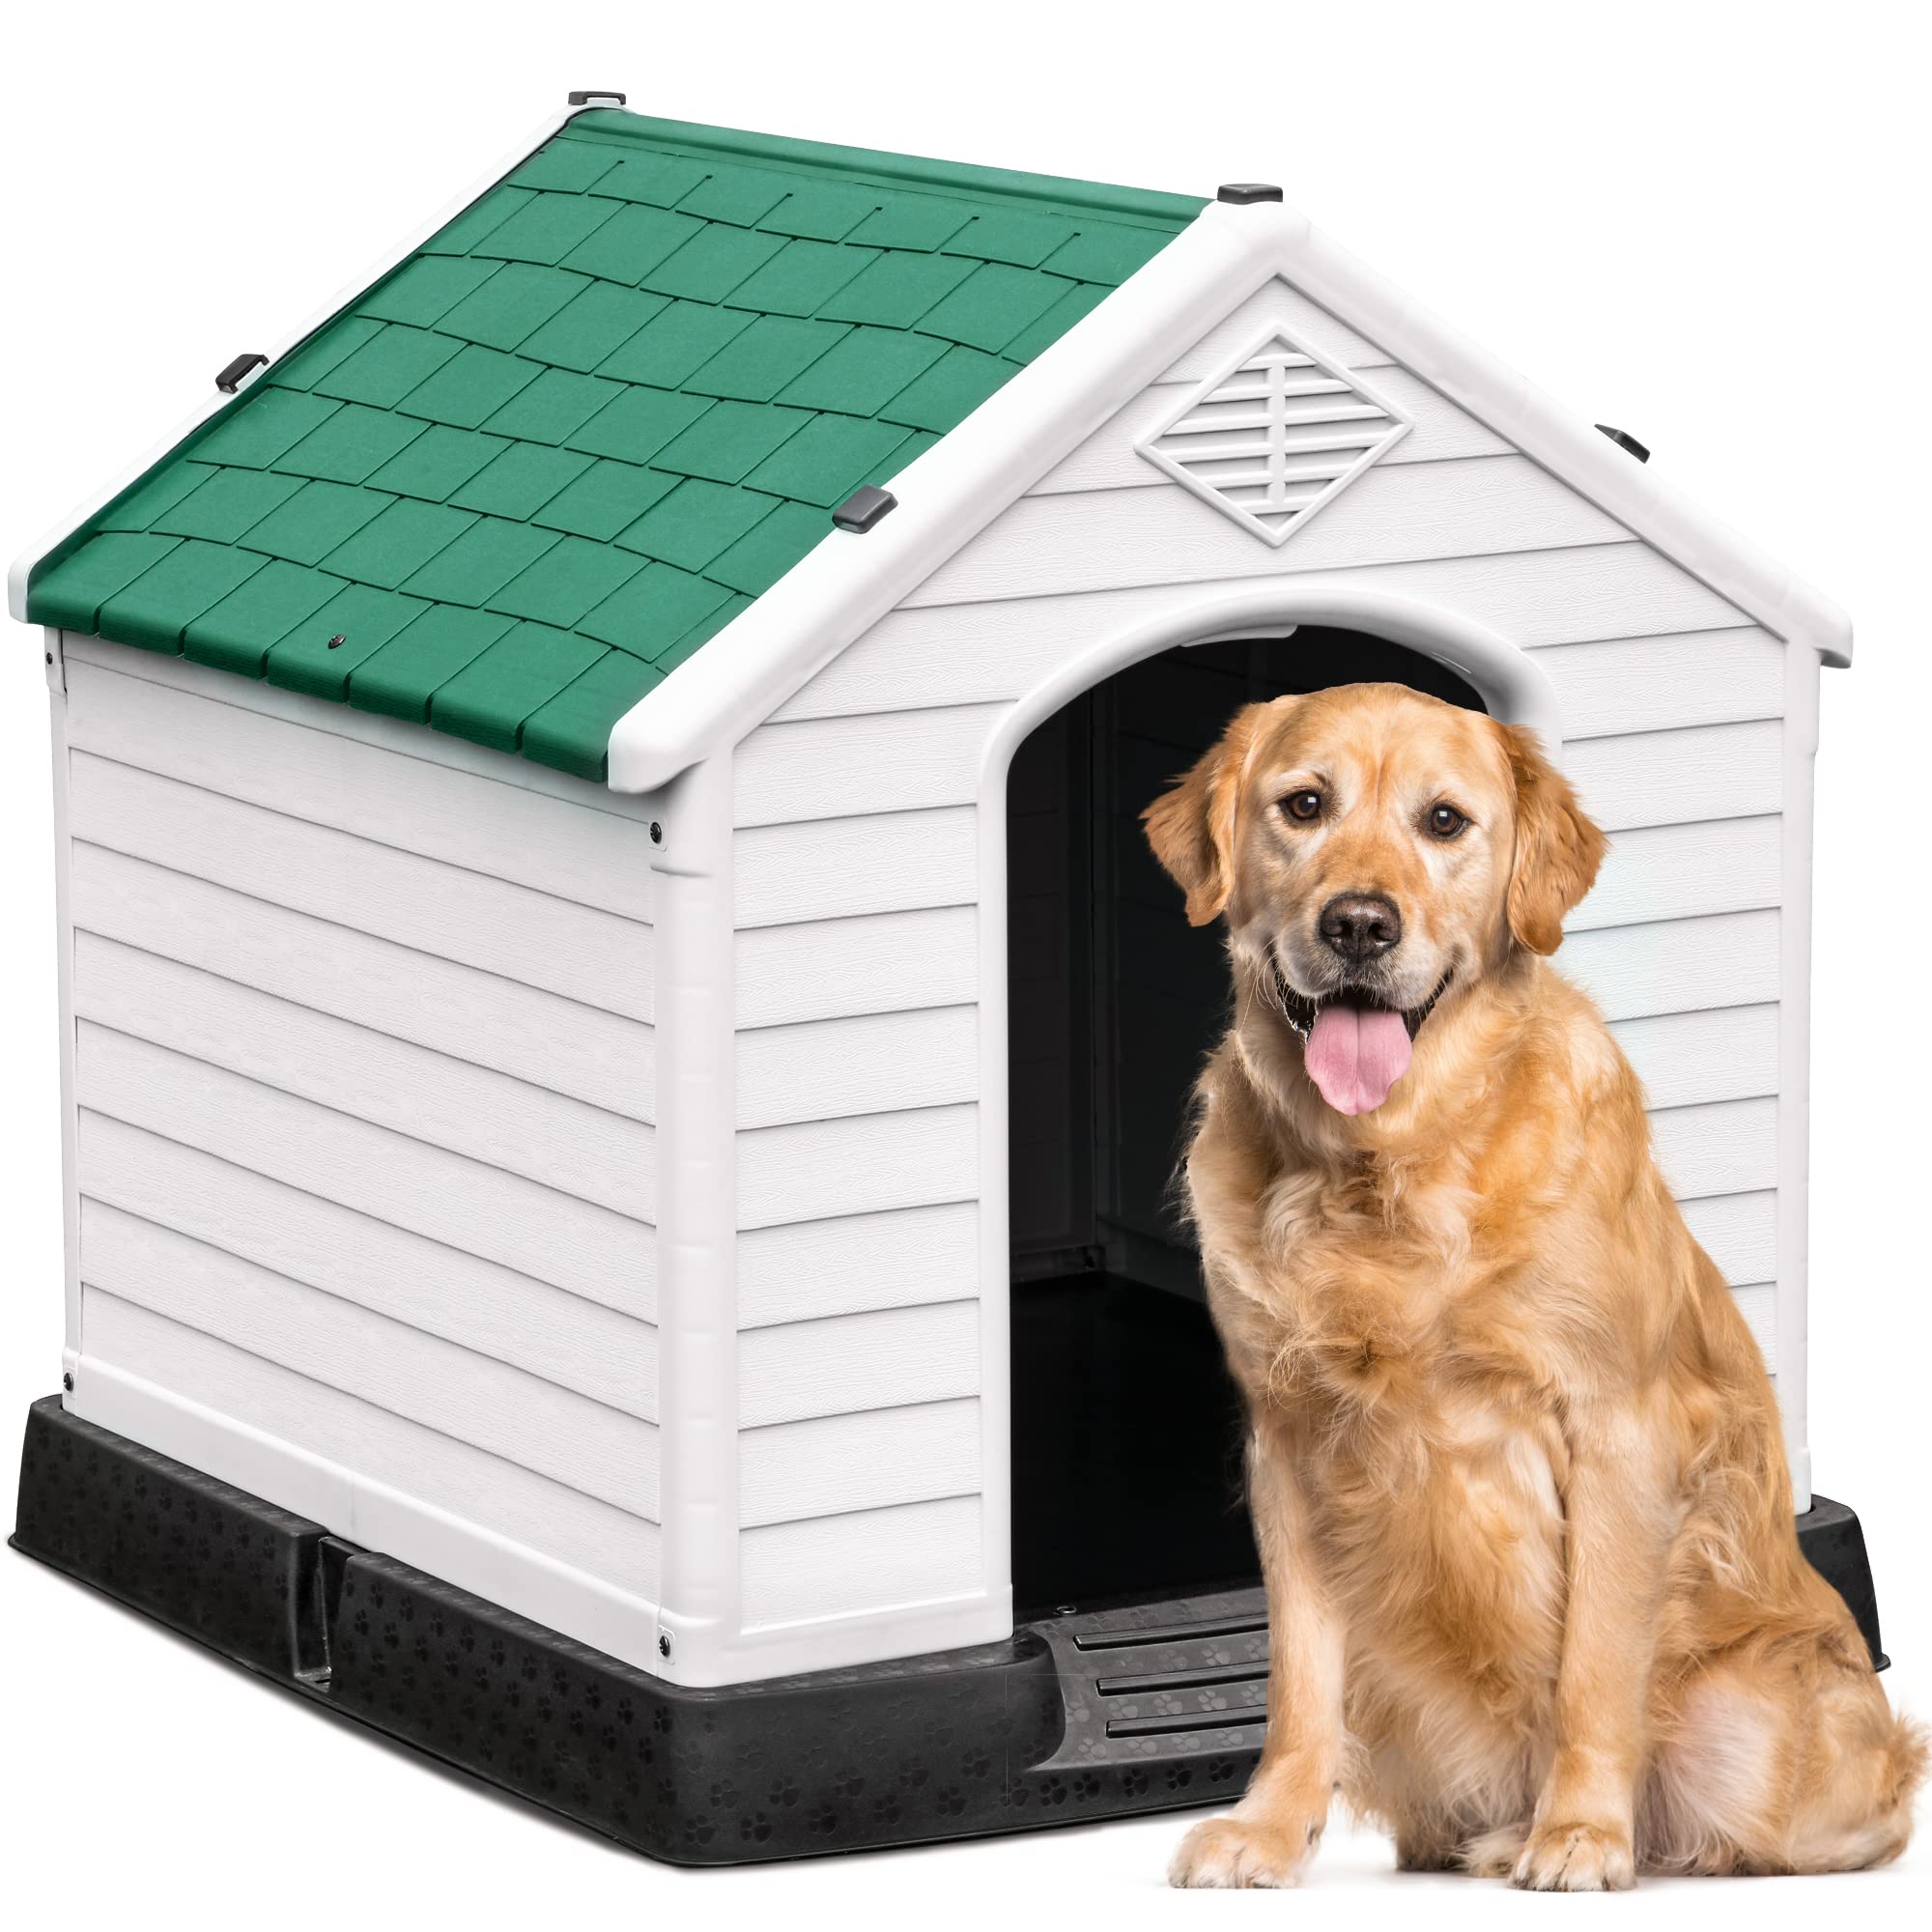 YITAHOME Large Plastic Dog House Outdoor Indoor Insulated Doghouse Puppy Shelter Water Resistant Easy Assembly Sturdy Dog Kennel